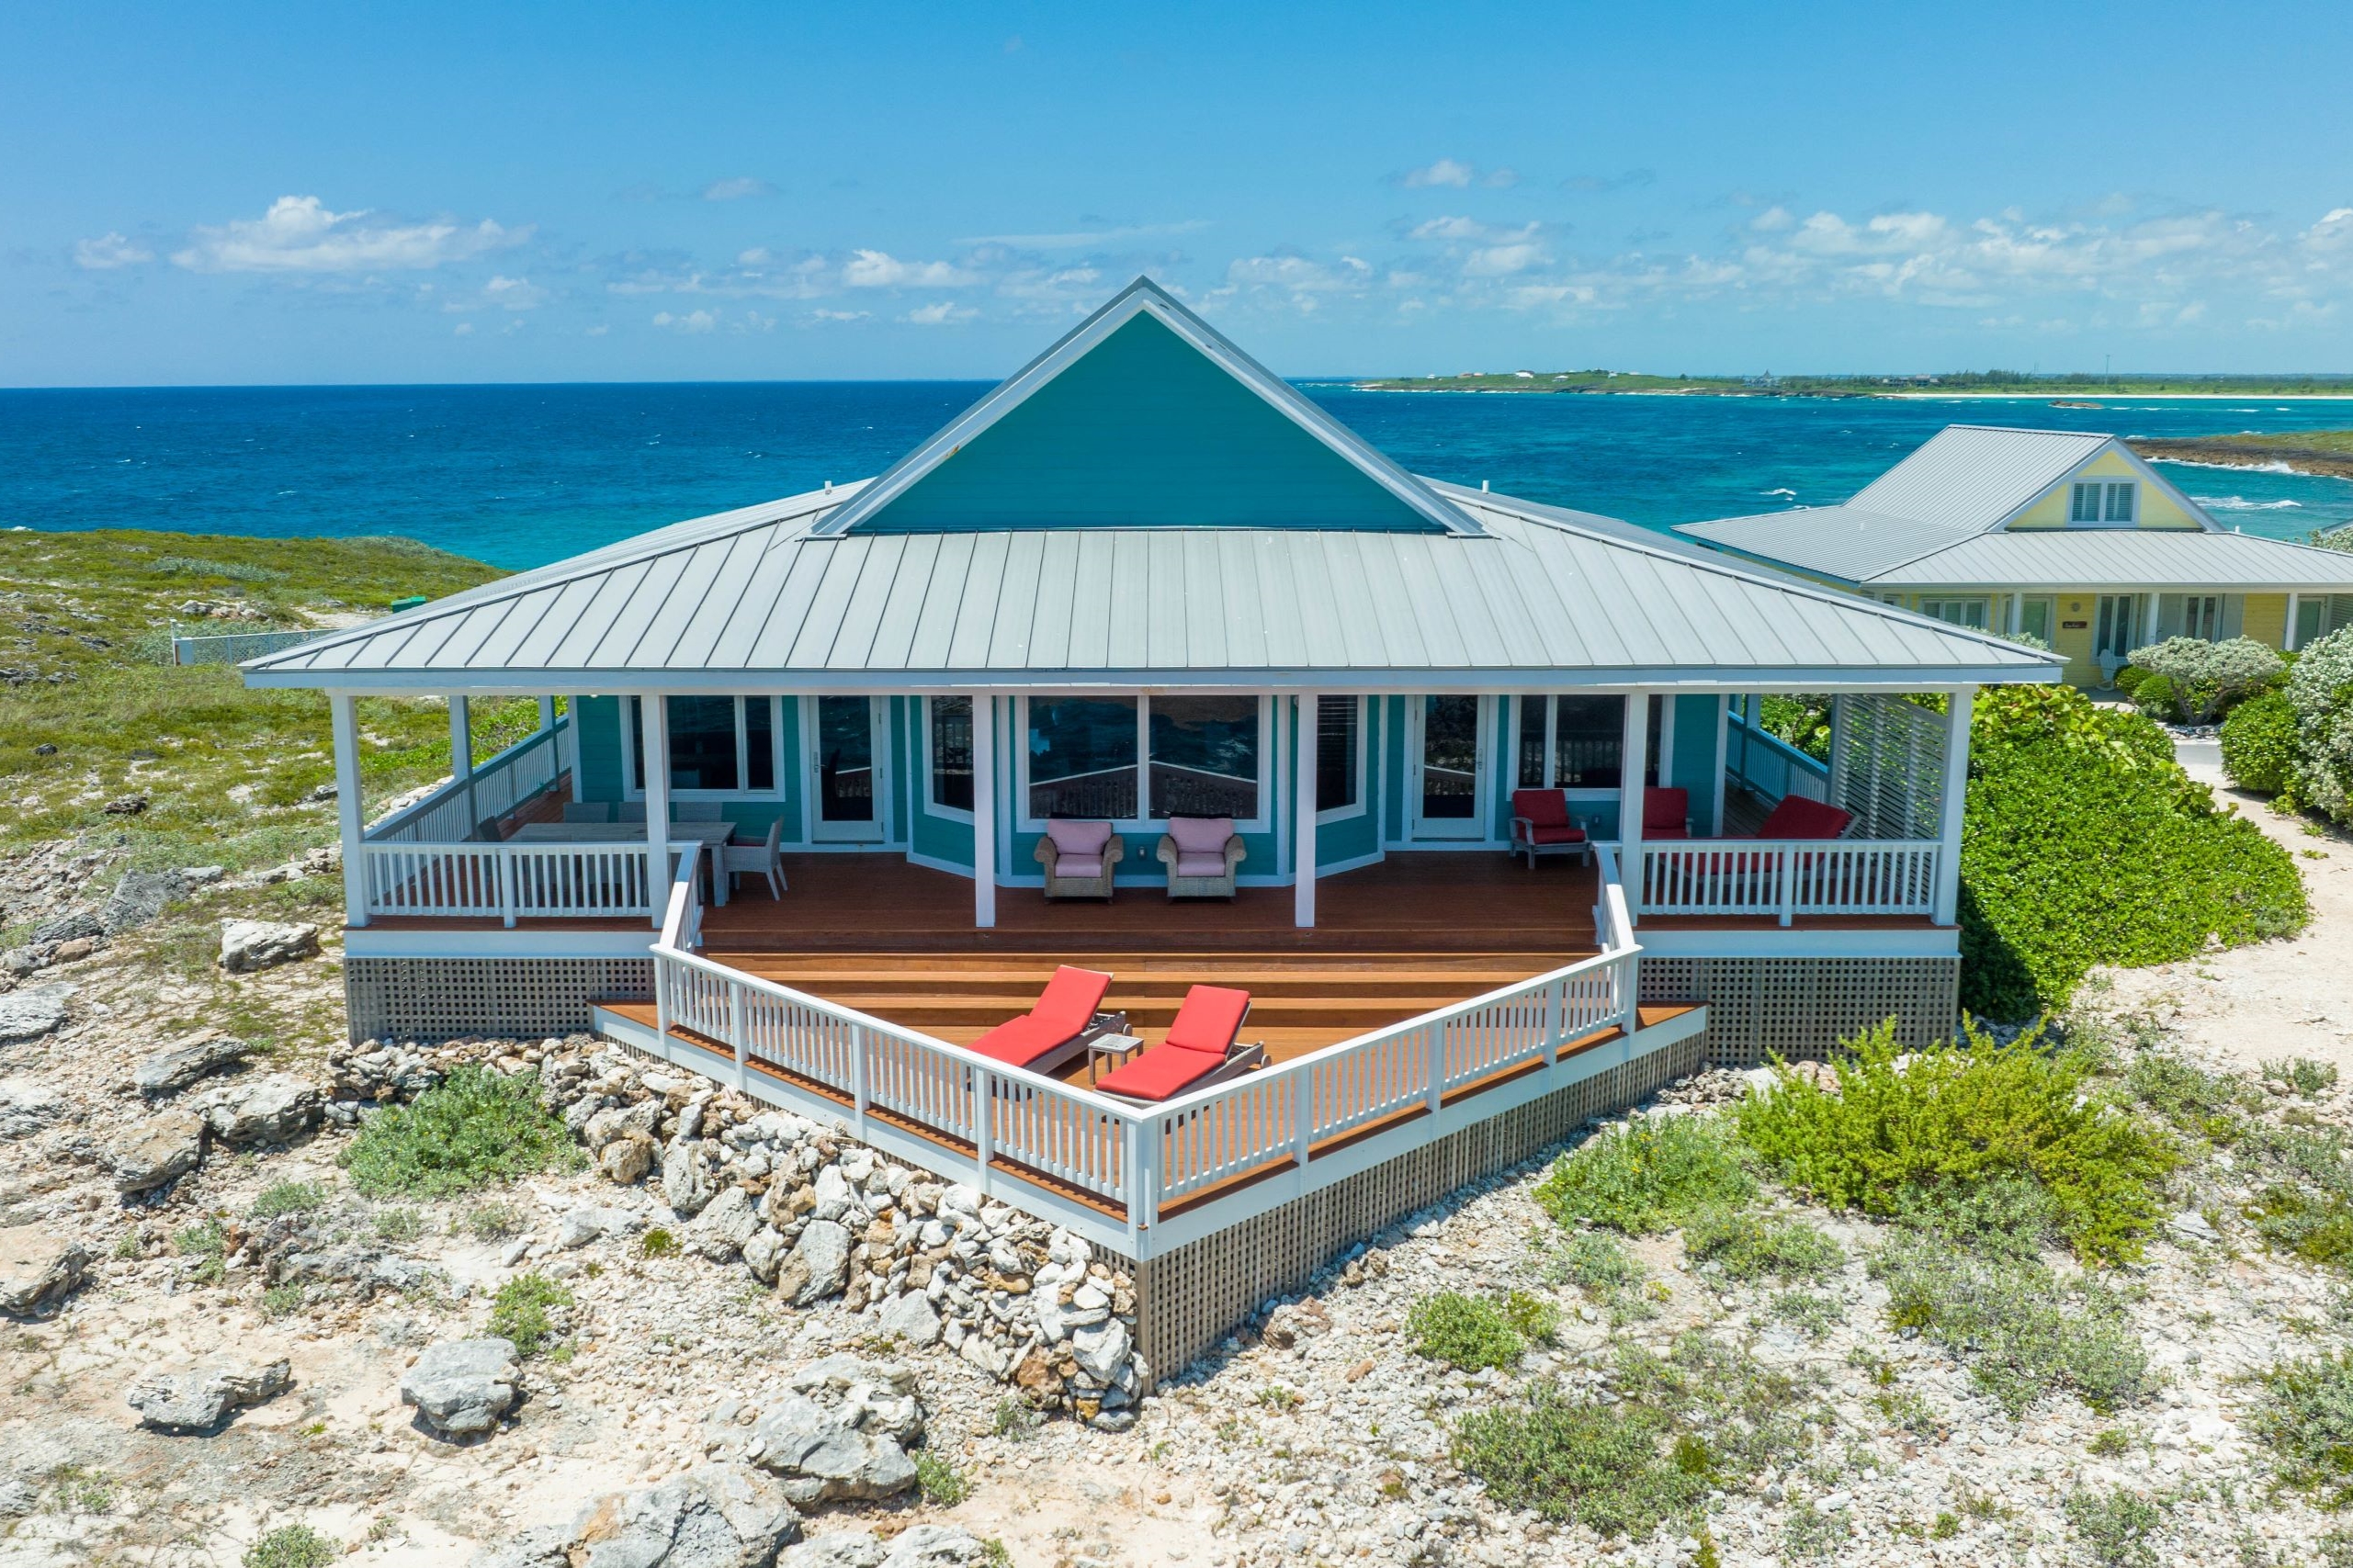 Aerial shot from a beachfront house on Winding Bay Bahamas